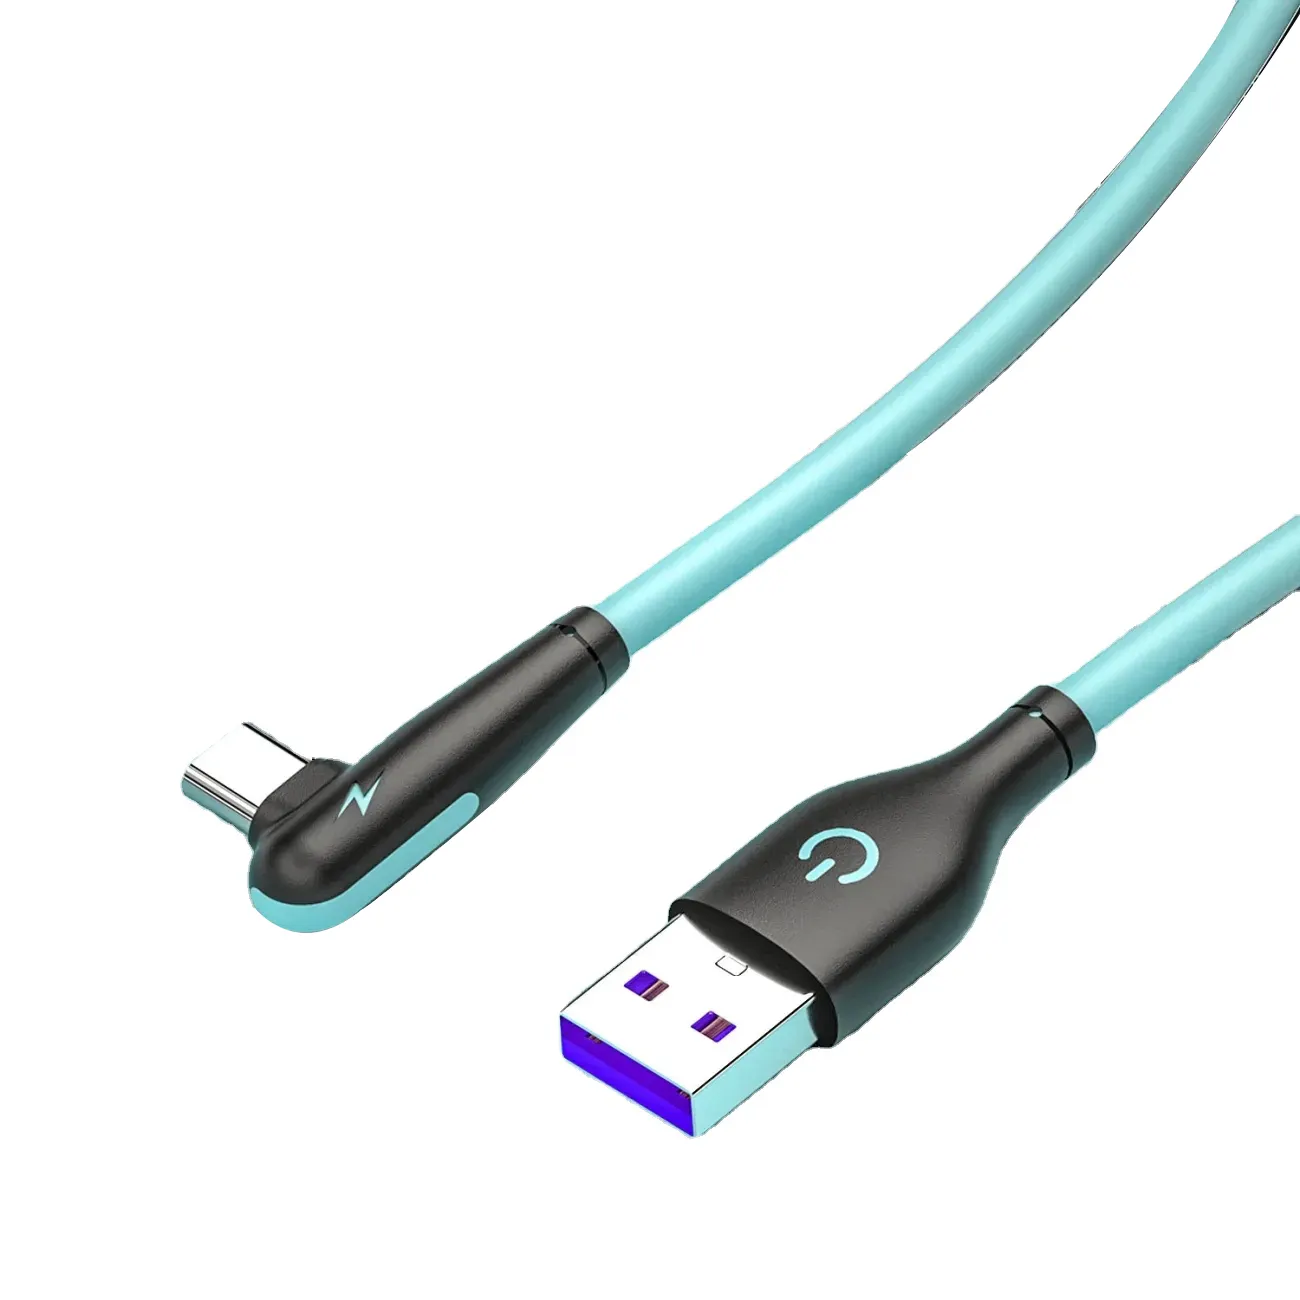 Hot Selling 1M phone charger cord Fast USB Cable Cord Android USB Data Quick USB Type C Charging Cable